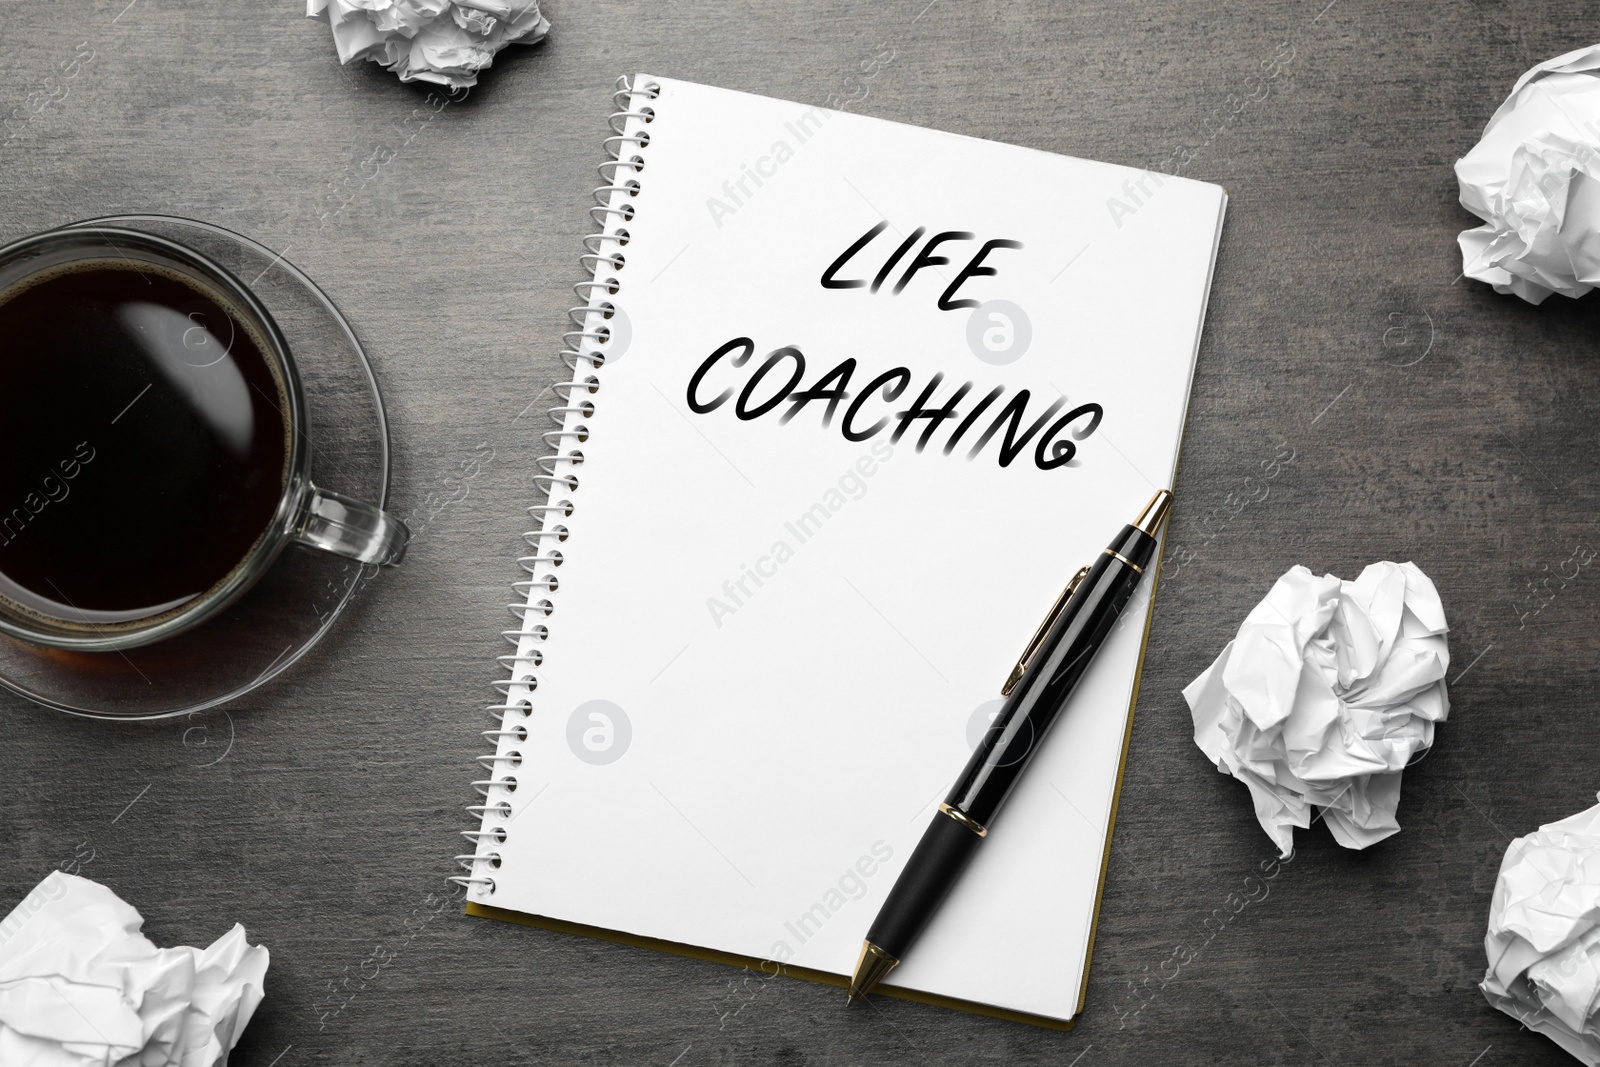 Image of Phrase Life Coaching written in notebook, cup of coffee, crumpled paper and pen on grey table, flat lay